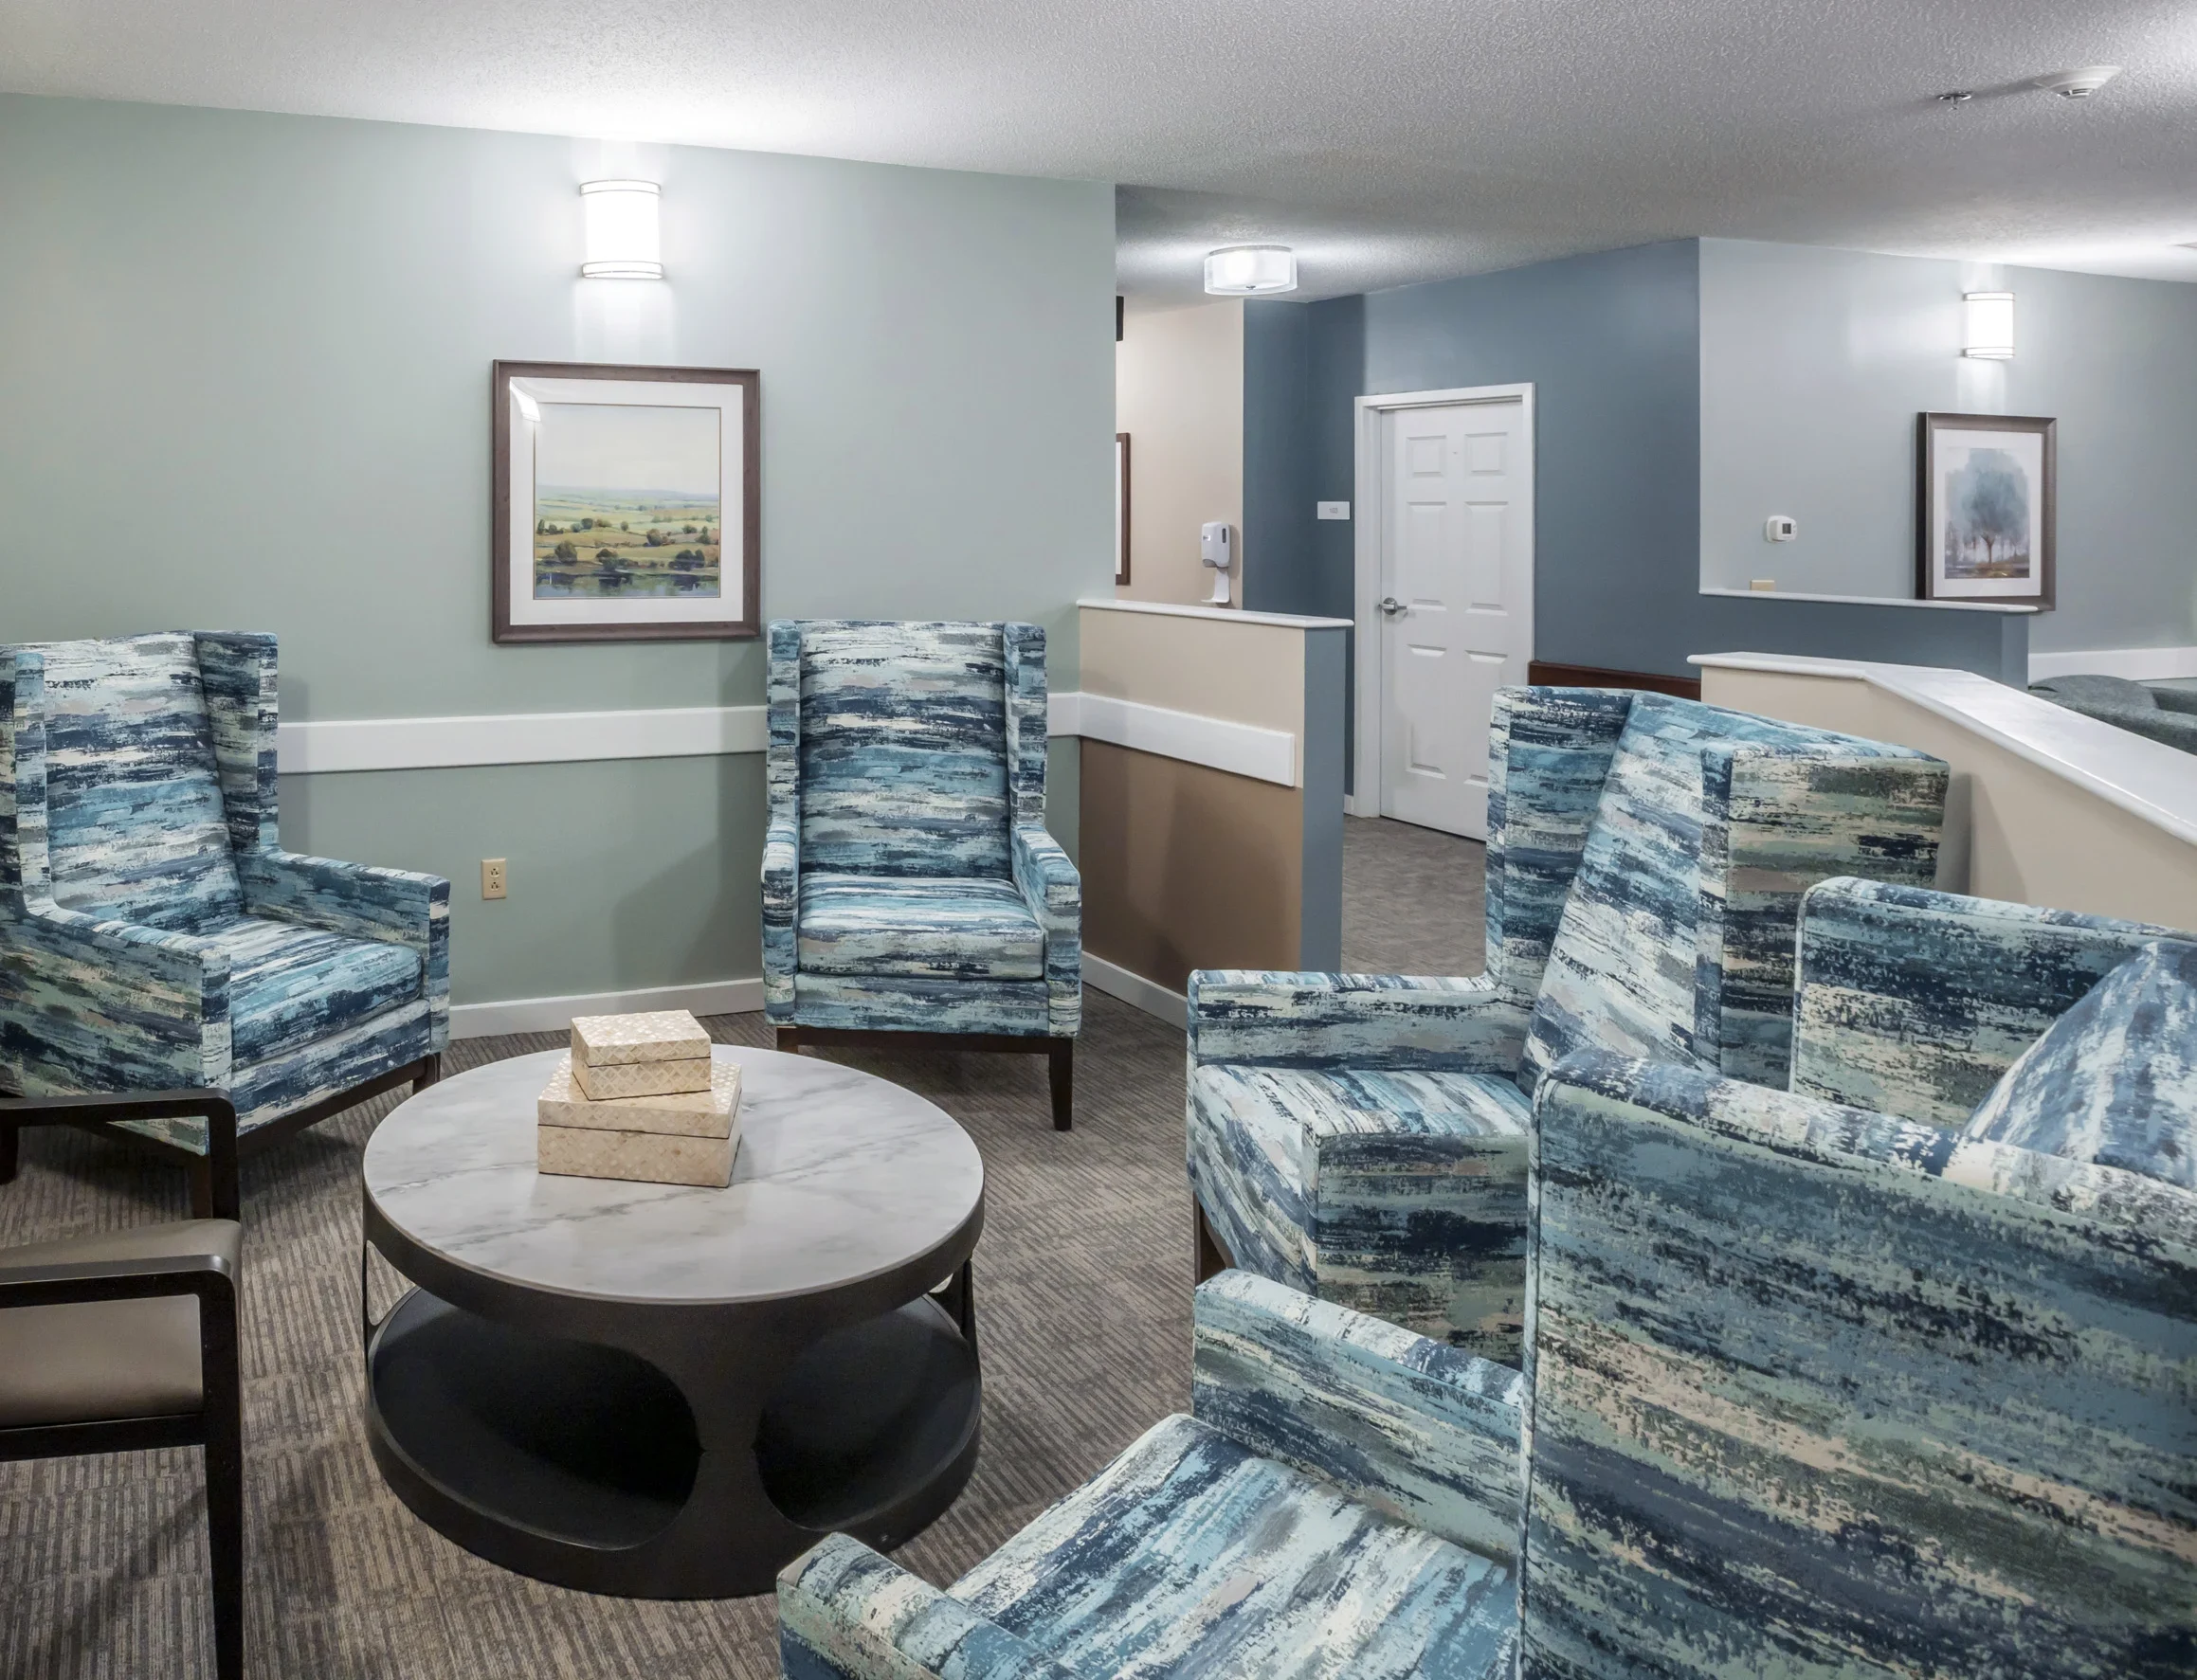 Common seating area / lounge at American House Kingsport, a retirement home in Kingsport, TN